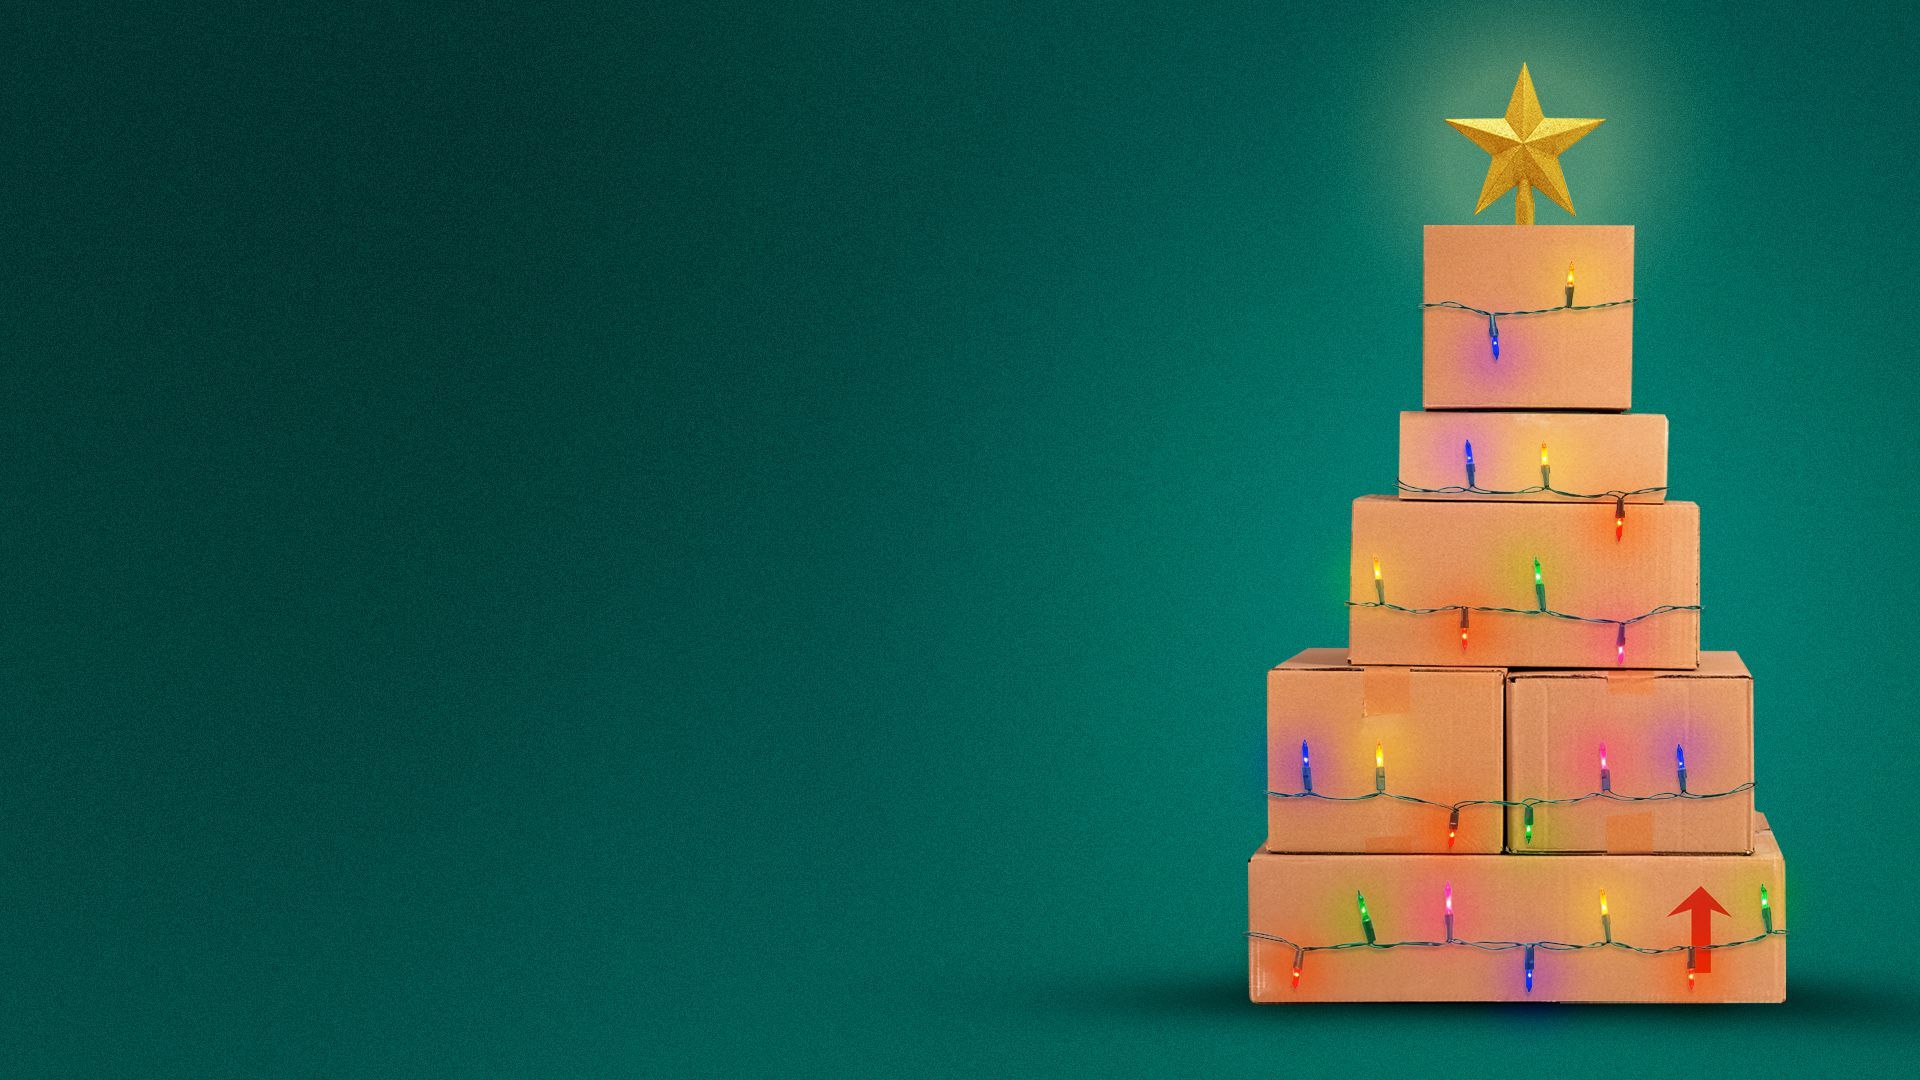 Illustration of a Christmas tree made from packages, complete with string lights and a glowing star.  